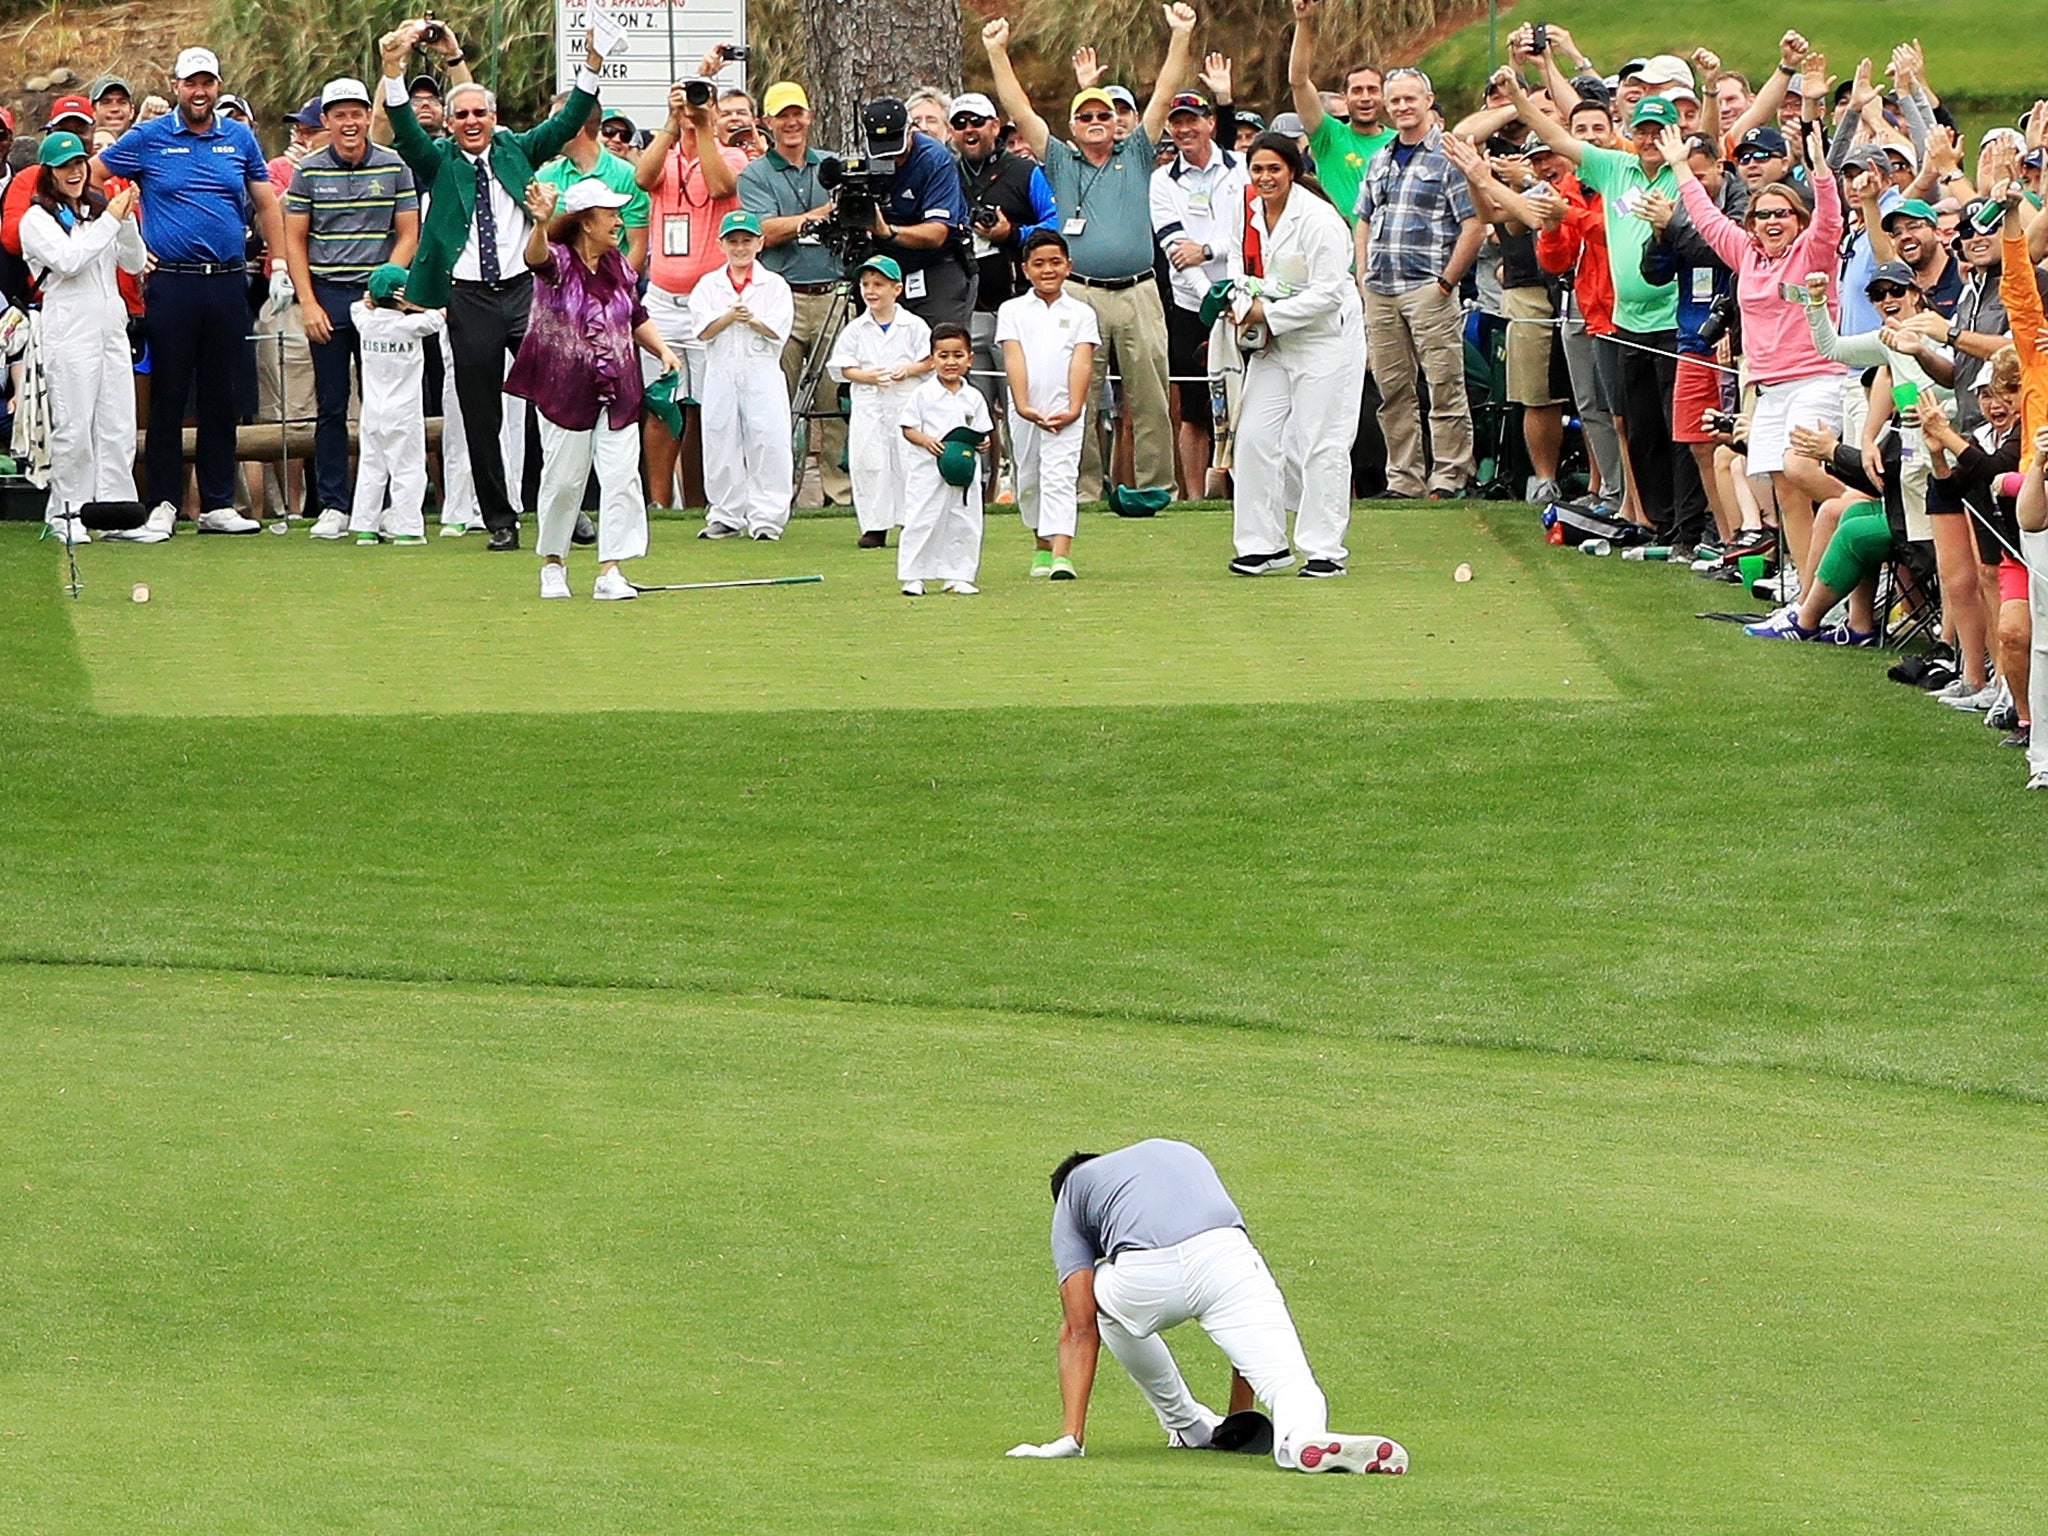 Tony Finau dislocated his left ankle while celebrating a hole-in-one